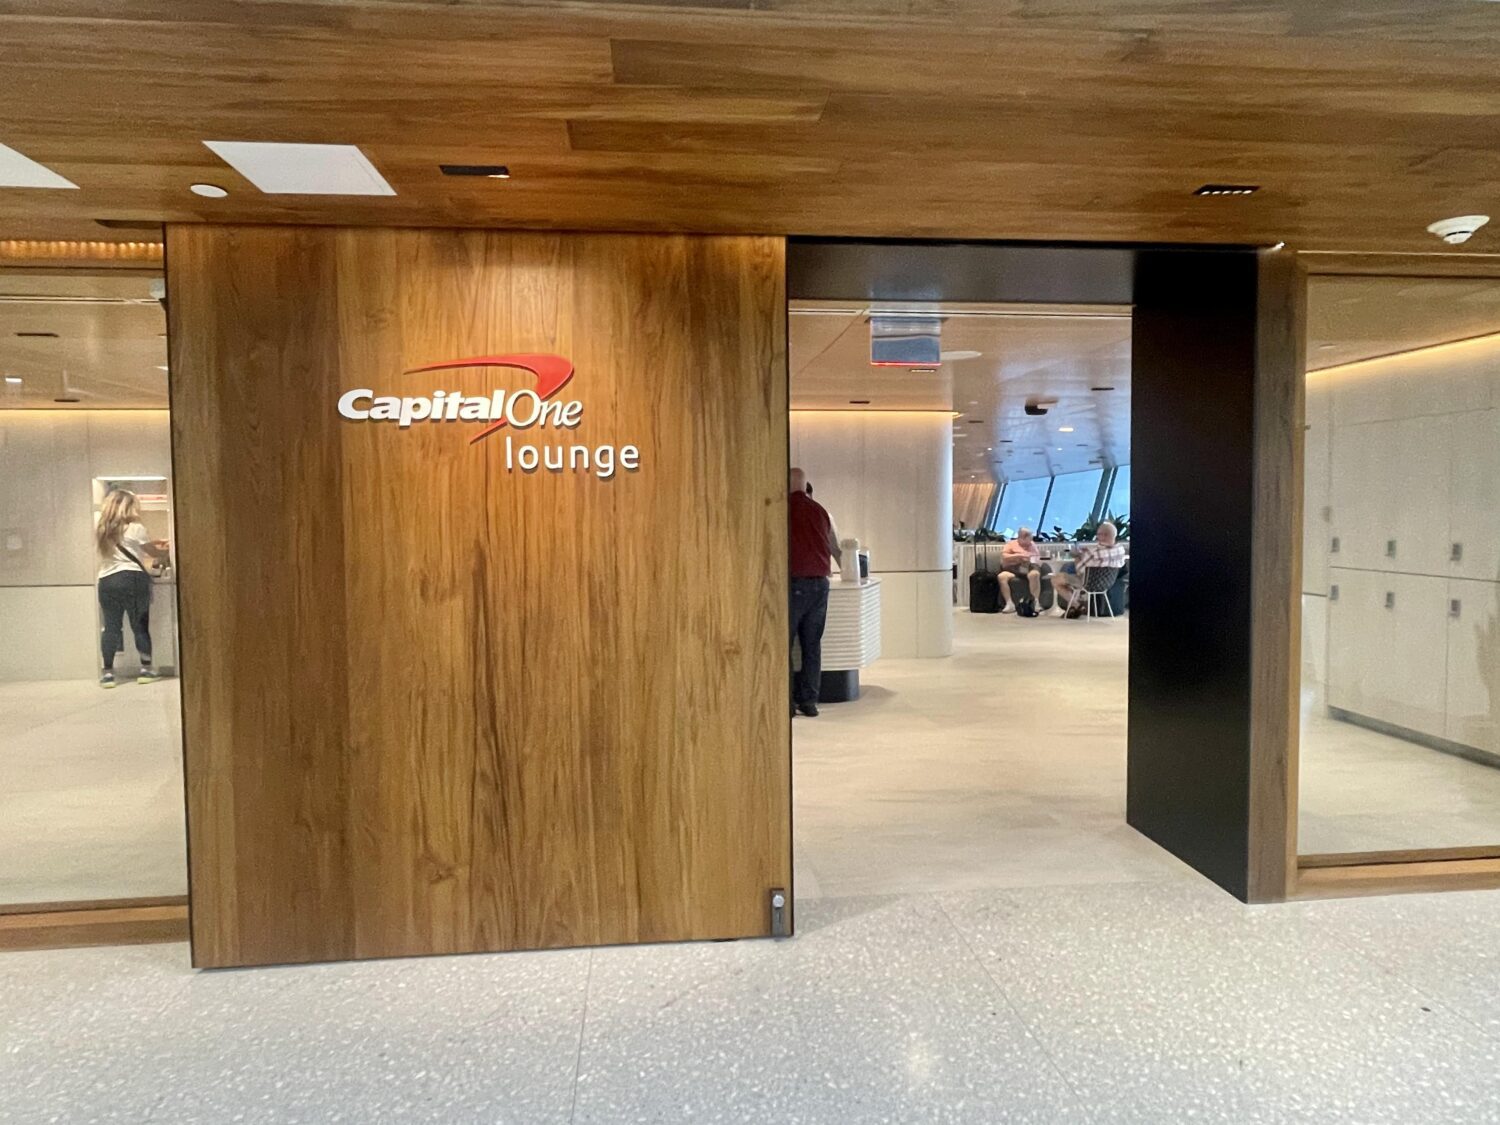 Dulles Capital One Lounge